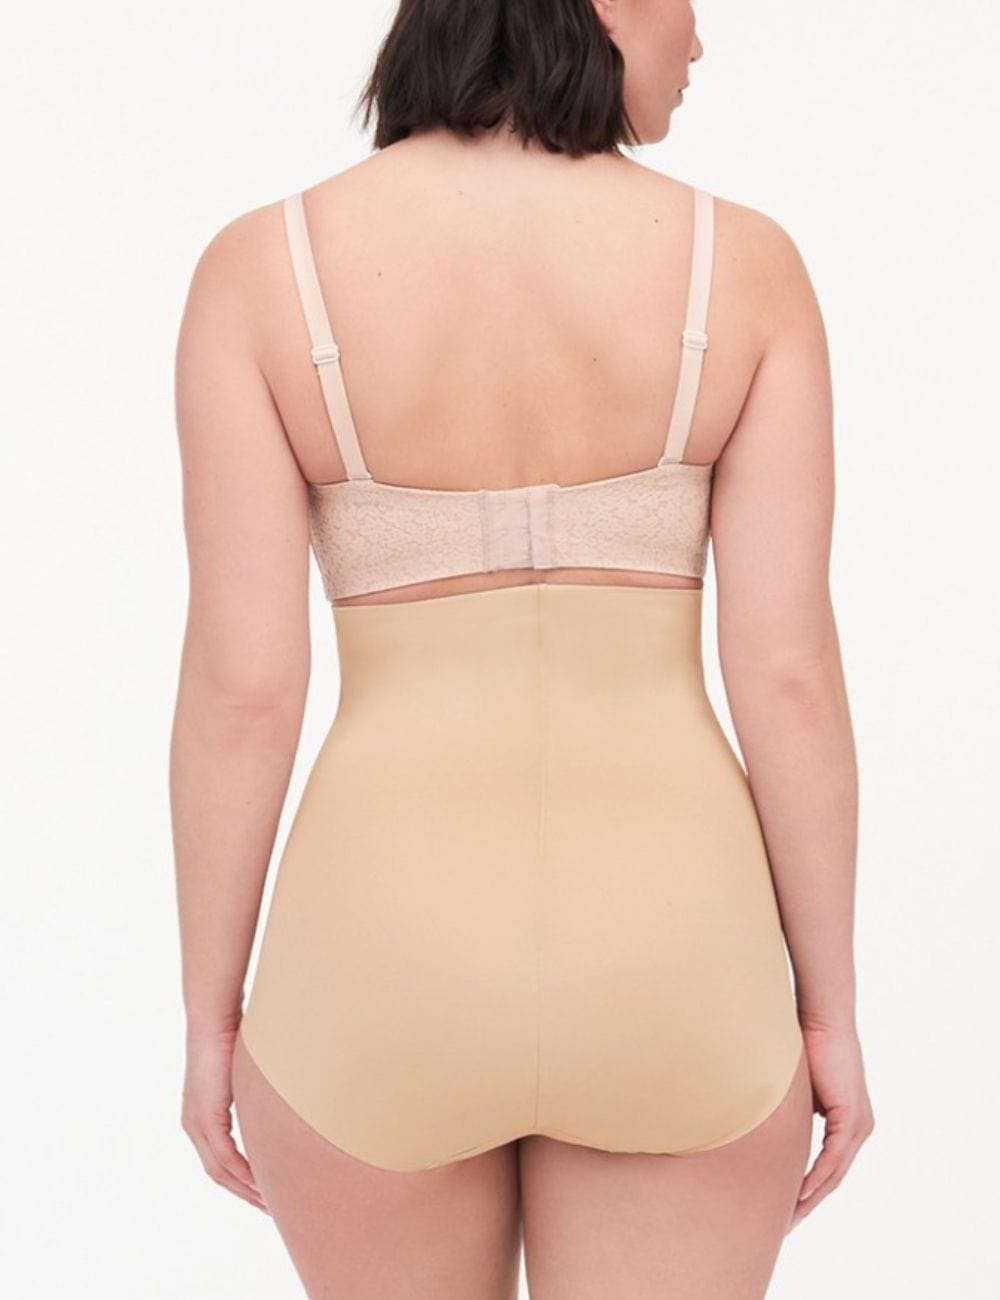 Women's Clearance SPANX Nude Lingerie